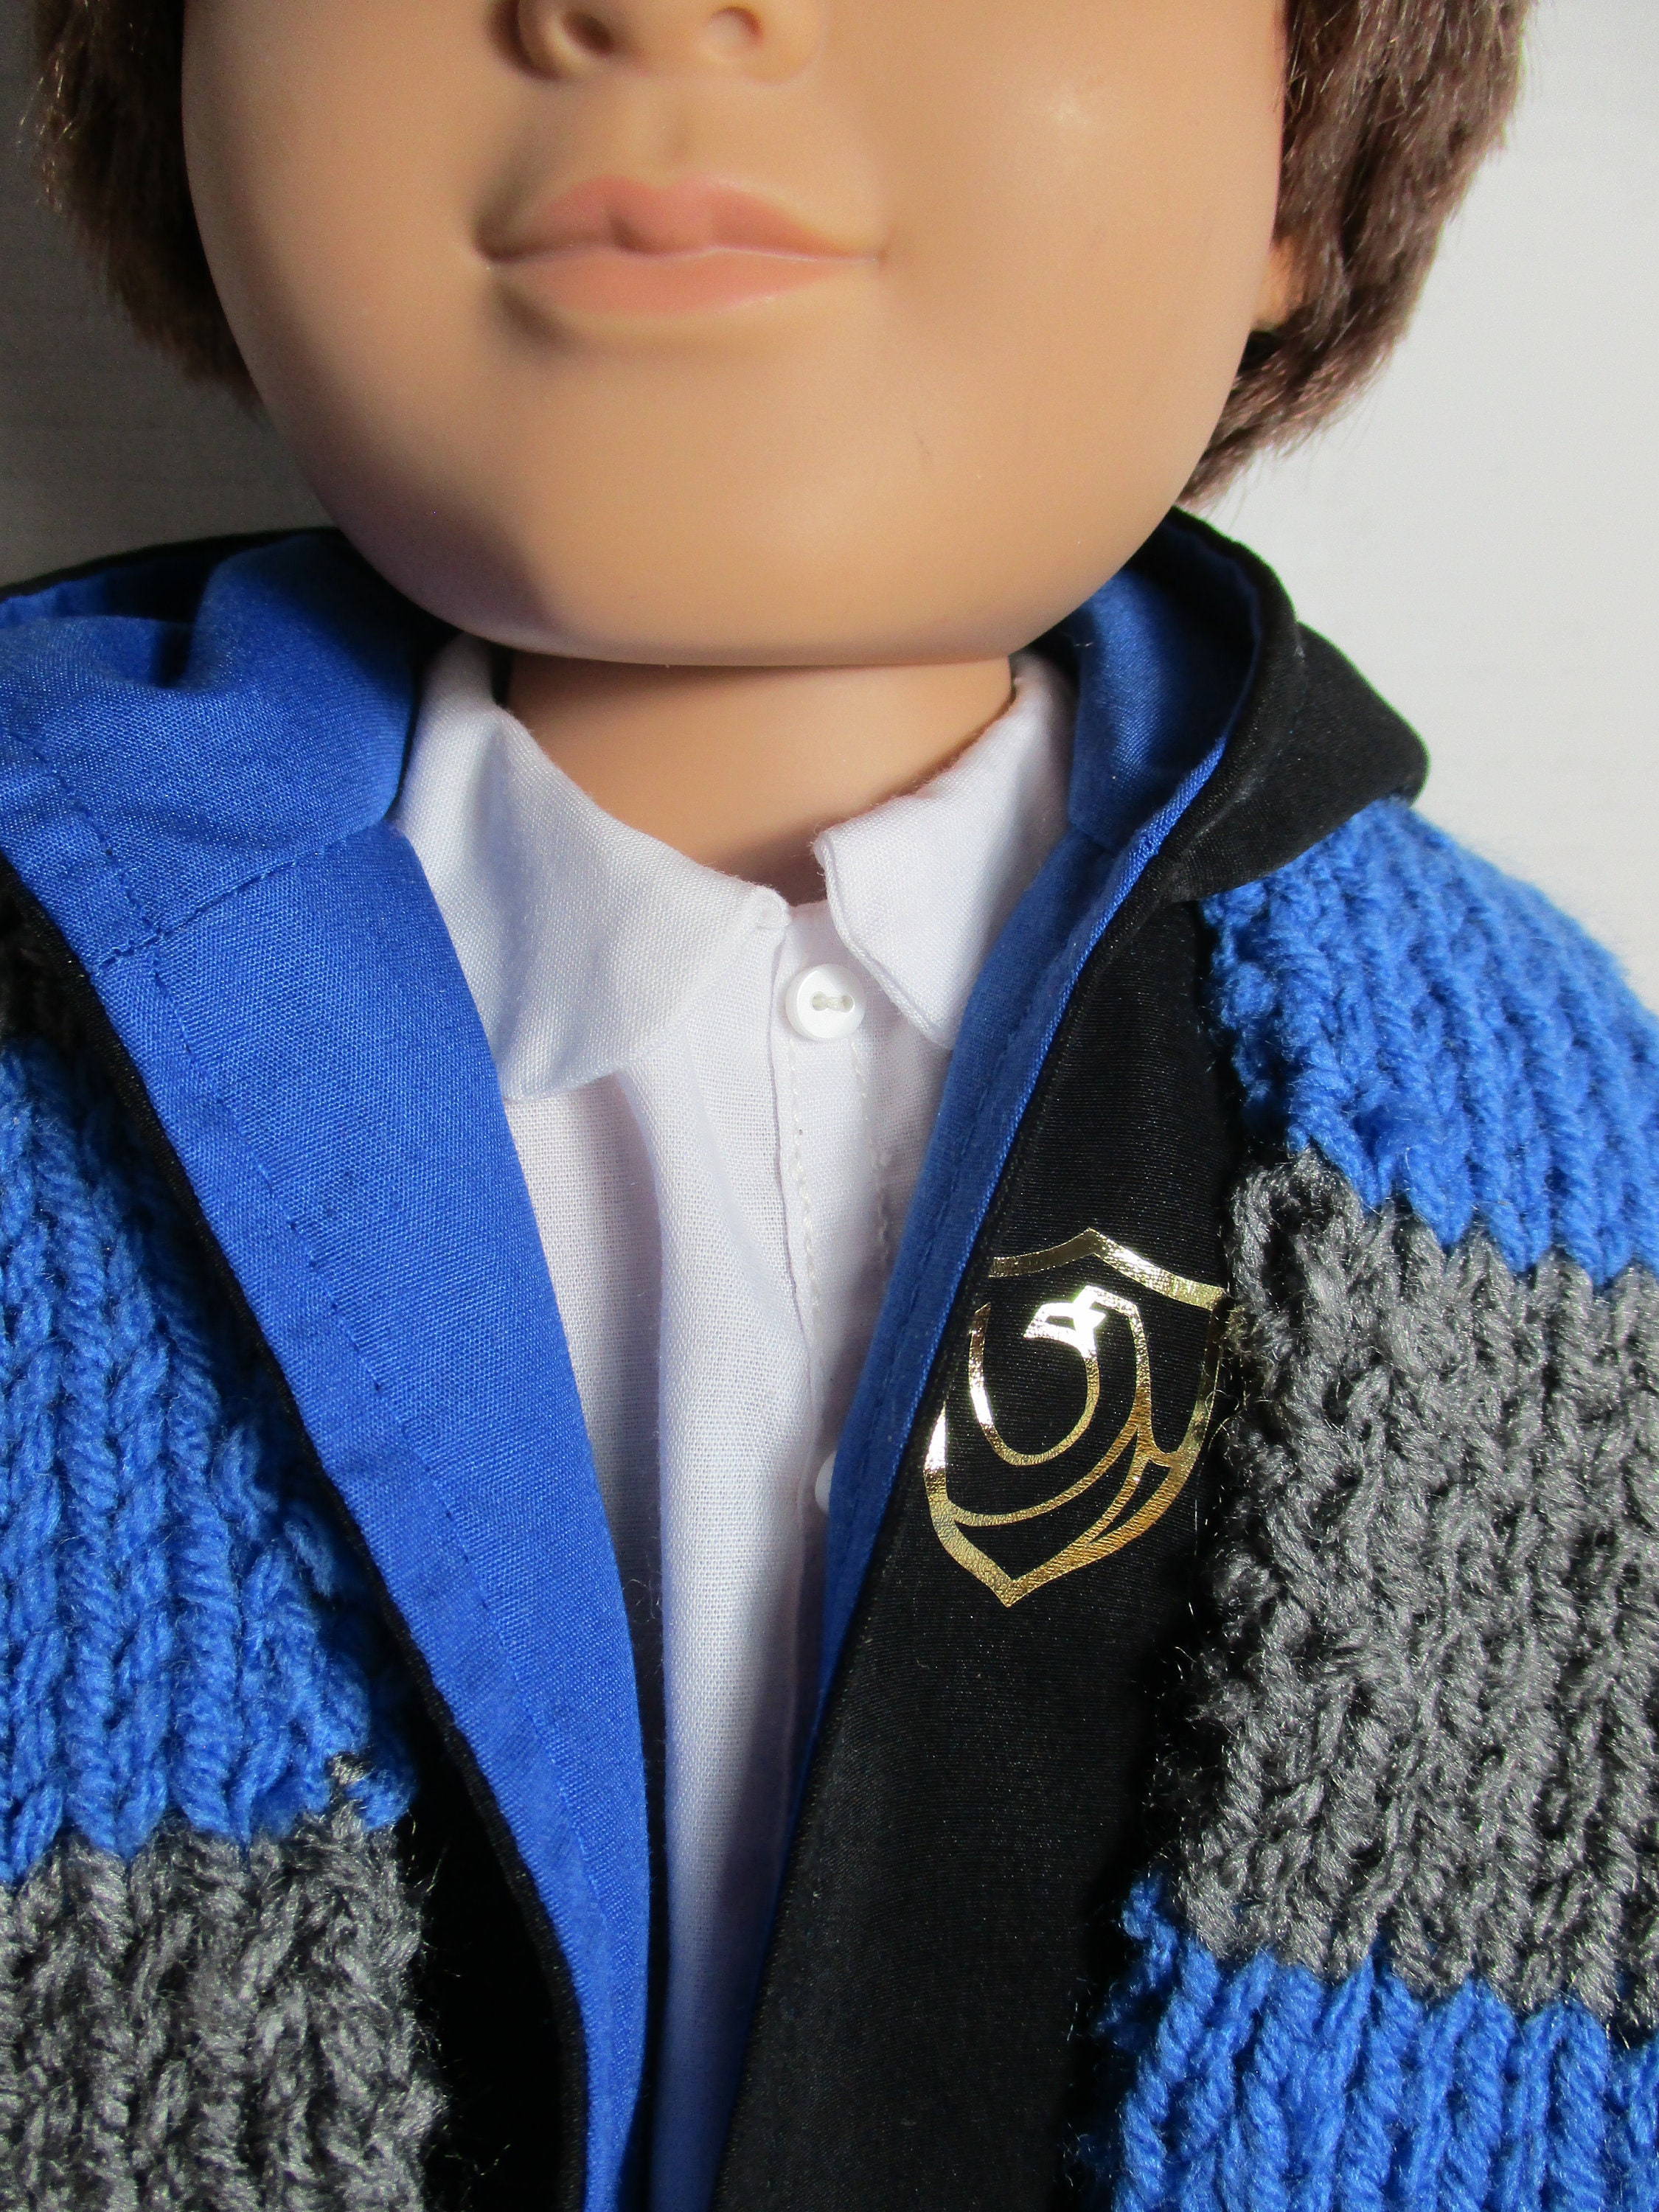 Wizard Wardrobe — Ravenclaw Uniform (requested by anon) - buy it